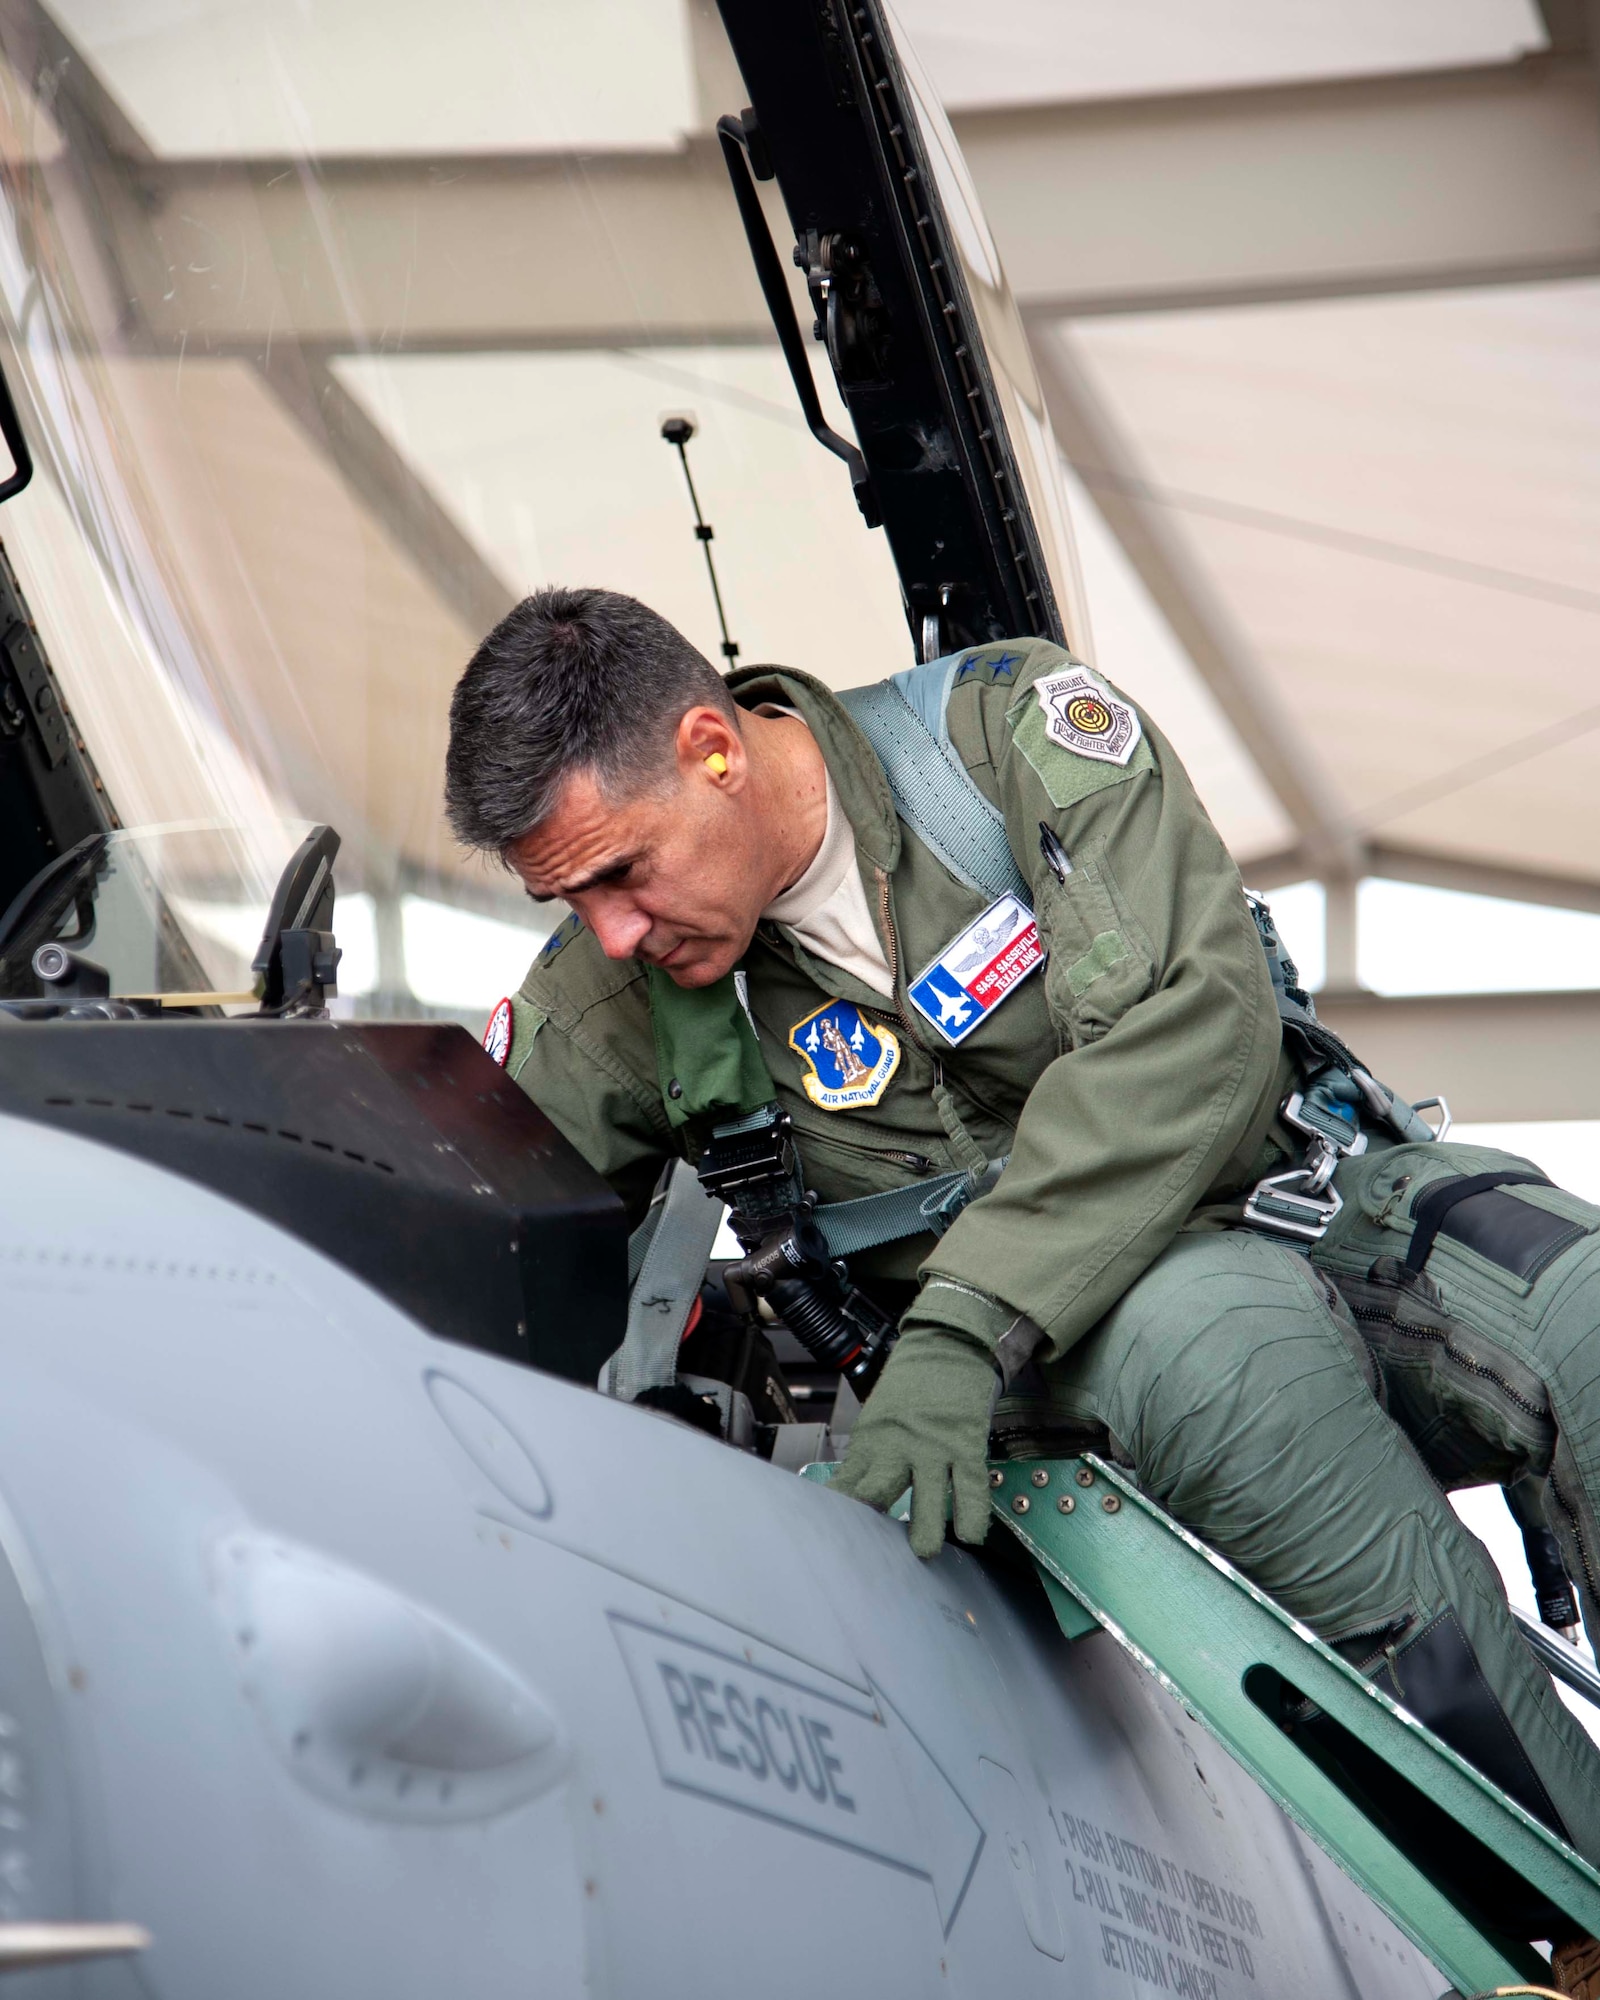 Lt. Gen. Marc Sasseville, Continental U.S. NORAD Region-1st Air Force (Air Forces Northern) Commander, checks out the instrument panel of an F-16 Fighting Falcon, prior to a flight for the F-16 Senior Officer Course, hosted by the 149th Fighter Wing, Joint Base San Antonio, Texas. The four-week course, designed to requalify experienced F-16 fighter pilots, focused on advanced handling characteristics, tactical formation and instrument-flying procedures. He also regained his air-air refueling currency during the course along with flying basic fighter maneuvers. He was required to requalify in the fighter jet based on his roles and responsibilities as the CONR-1 AF (AFNORTH) Commander. (Air Force photo by Capt. Cindy Piccirillo)